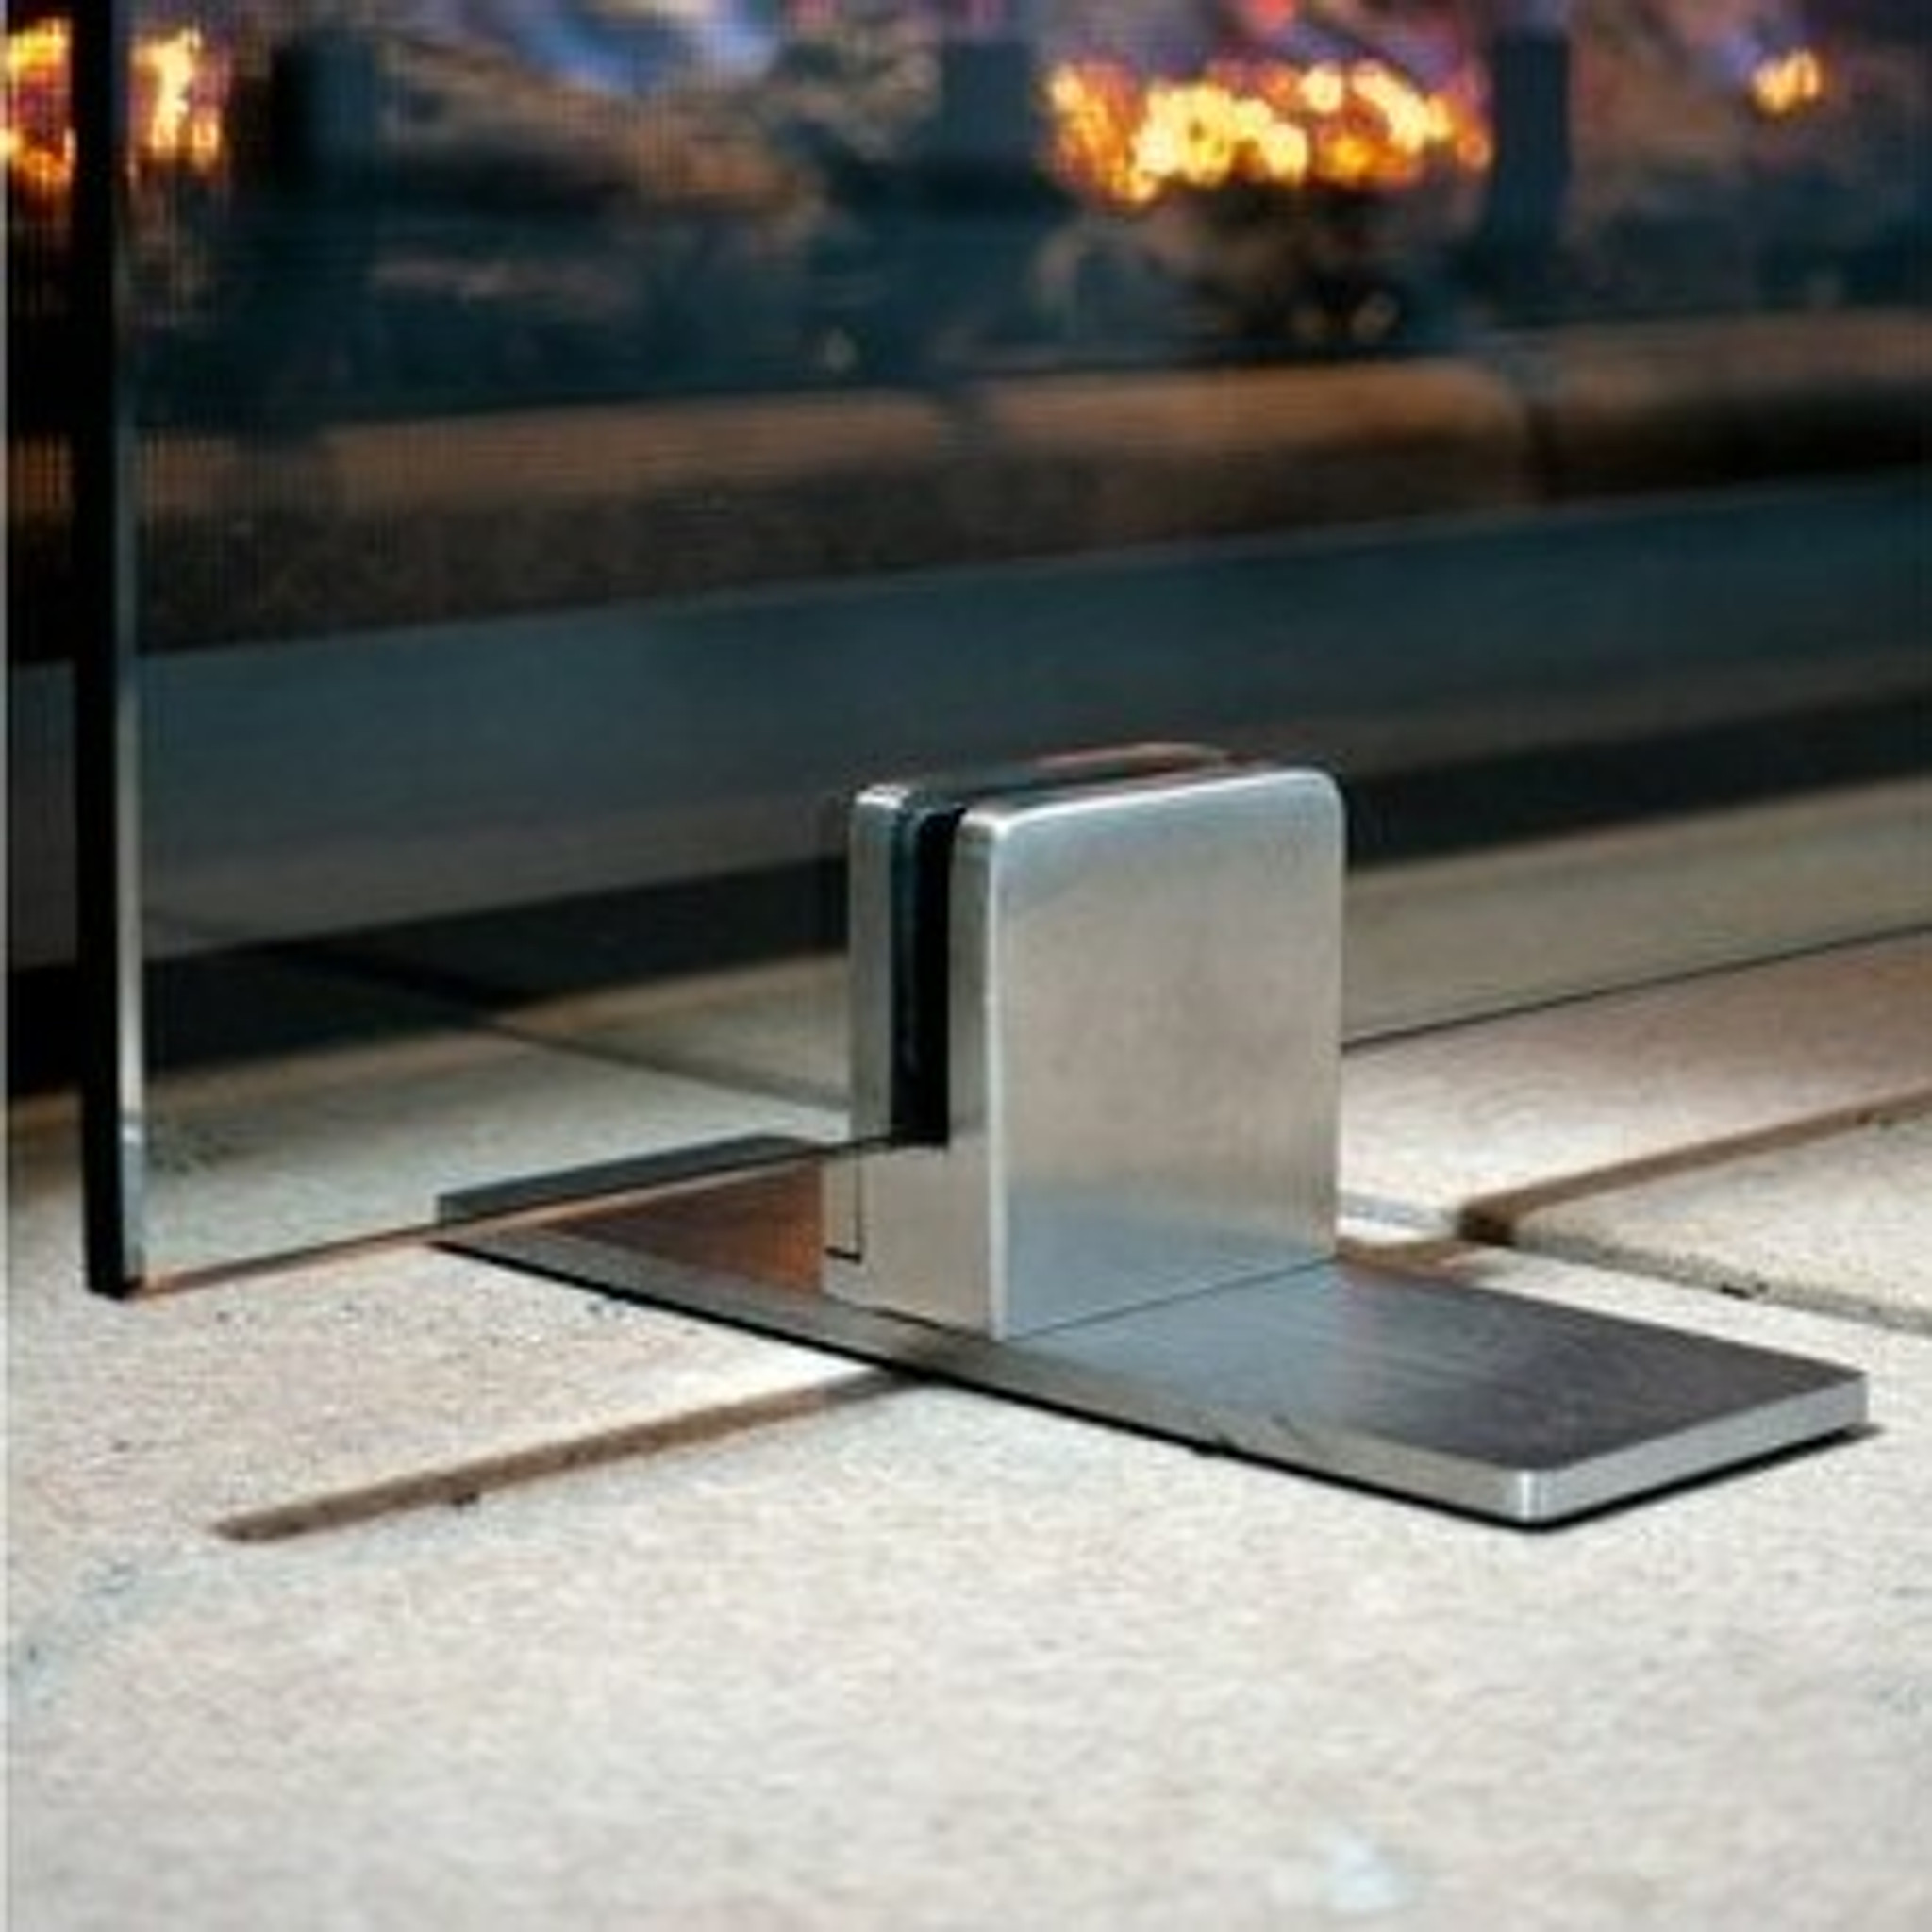 46 in. x 33 in. XL Free Standing Clear Tempered Glass Single Panel Fireplace Screen Flame Guard